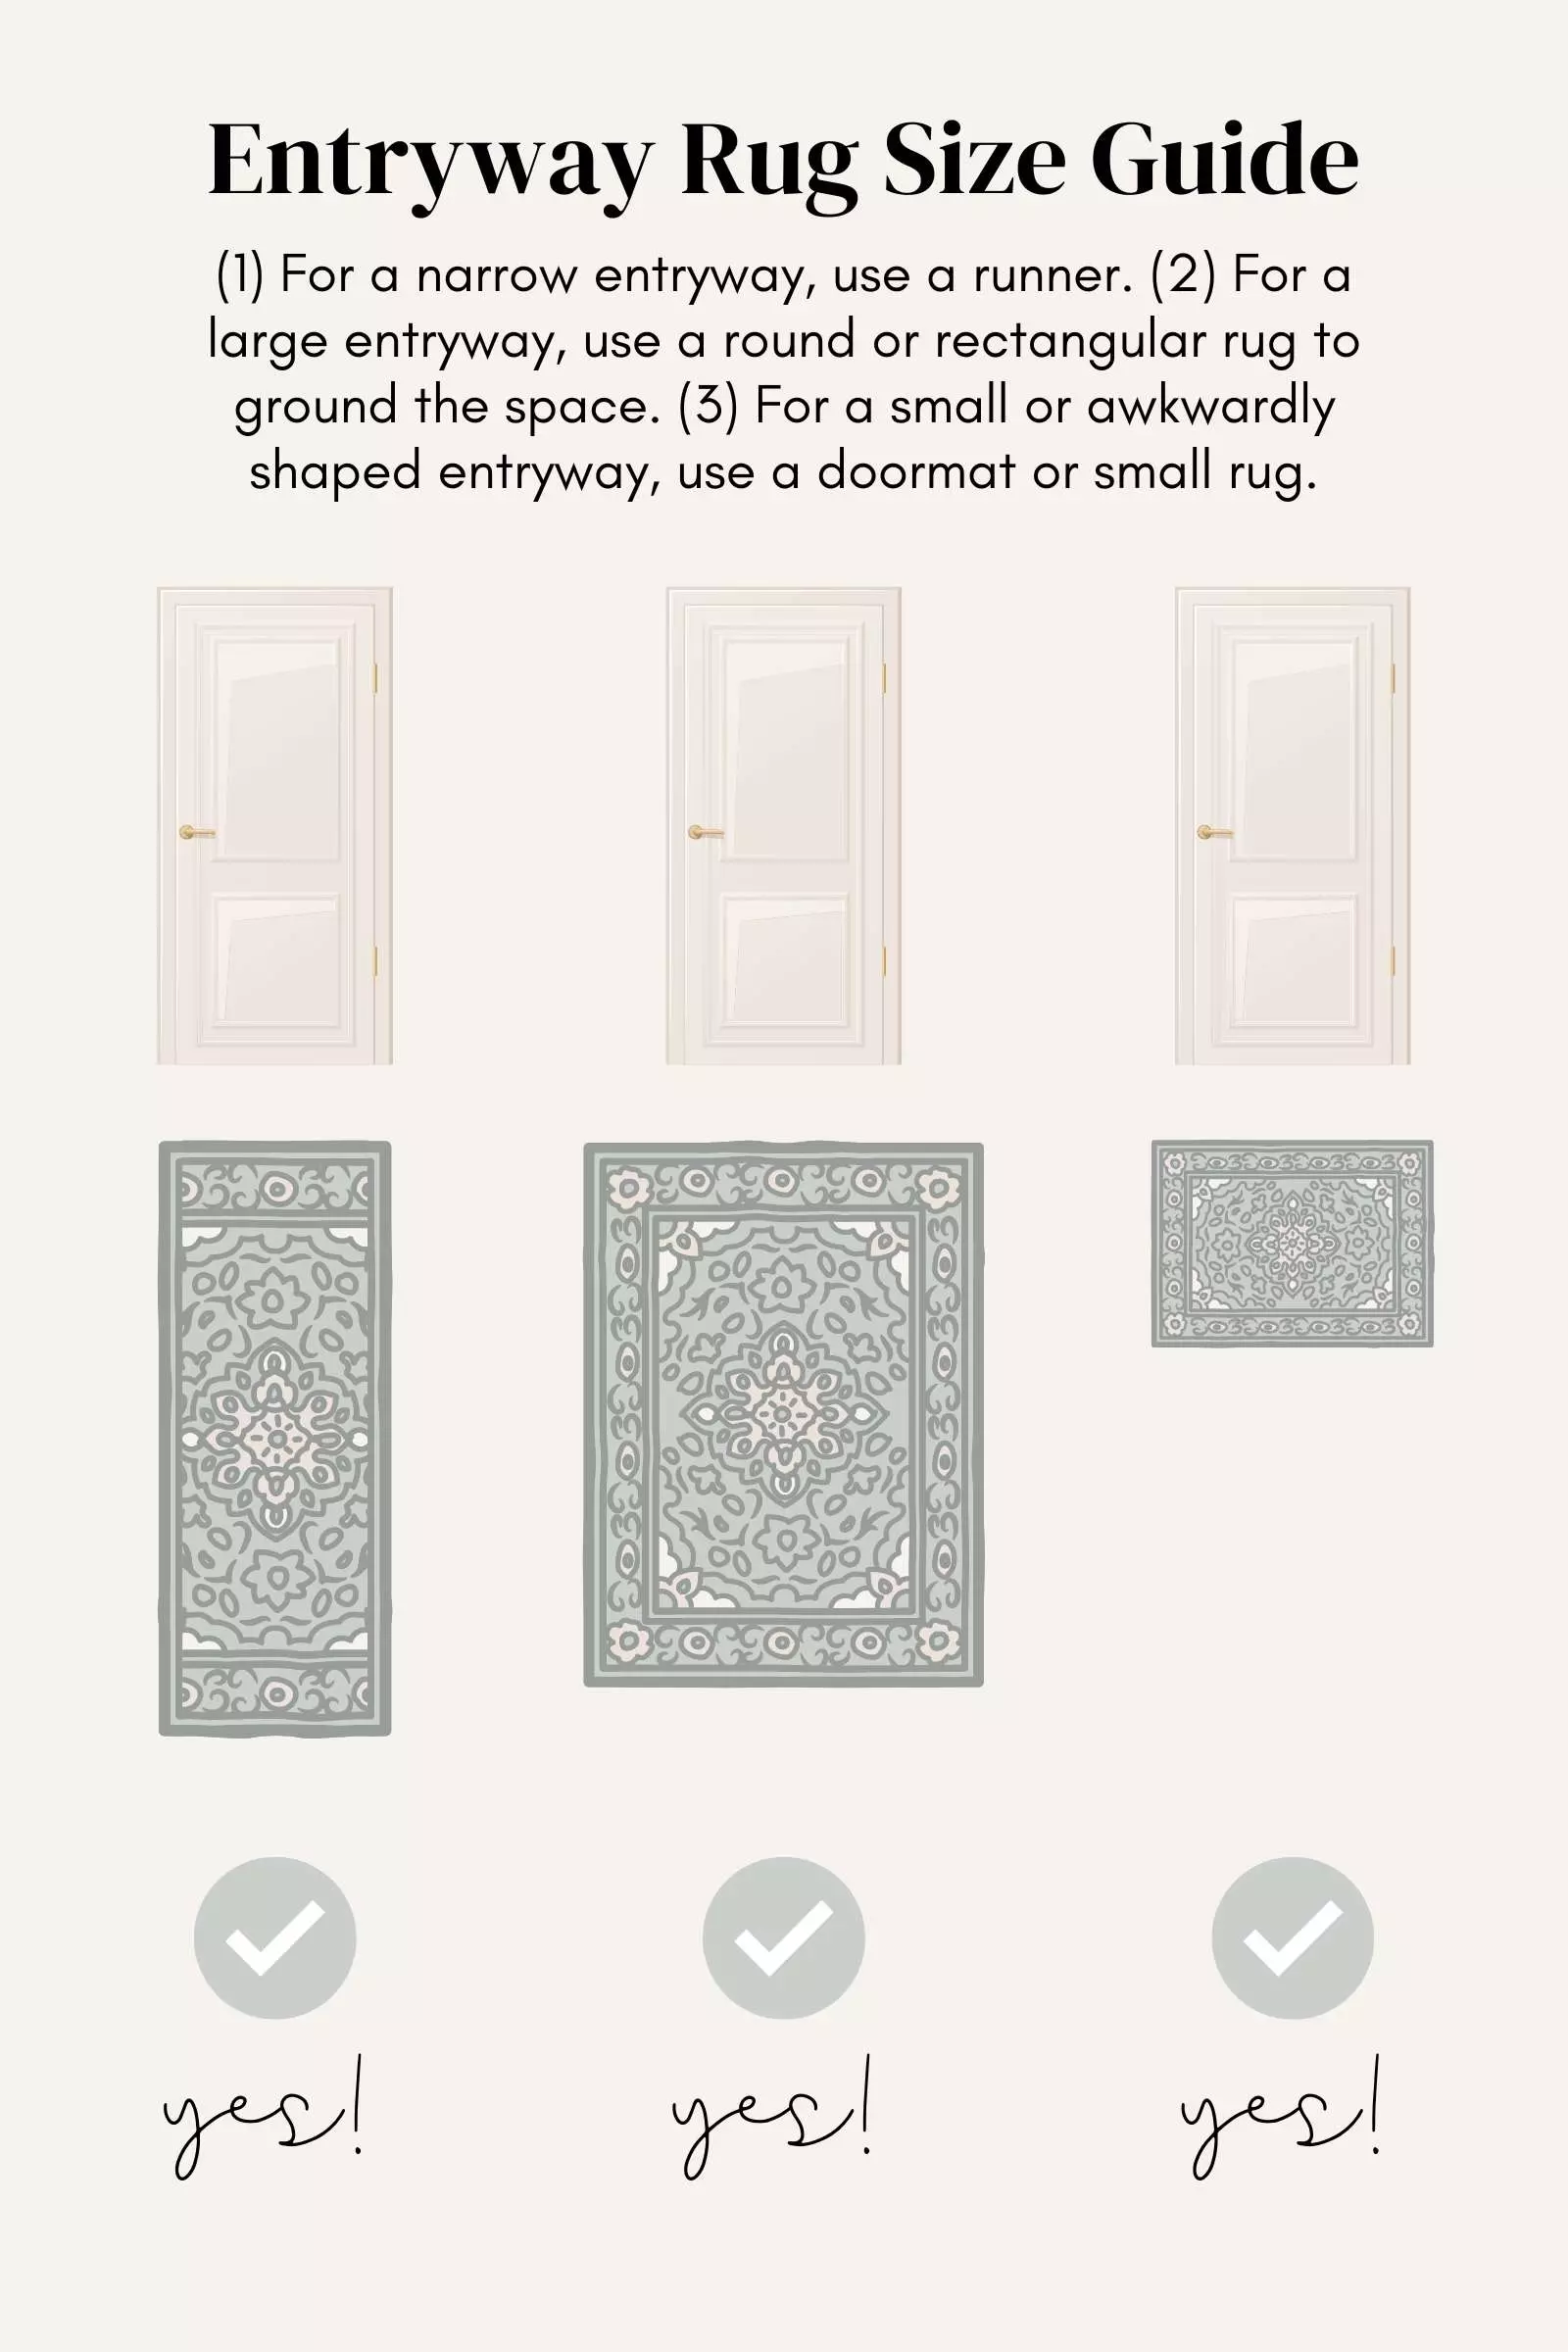 Entryway Rug Size Guide: For a narrow entryway, use a runner. For a large entryway, use a round or rectangular rug to ground the space. For a small or awkwardly shaped entryway, use a doormat or small rug.